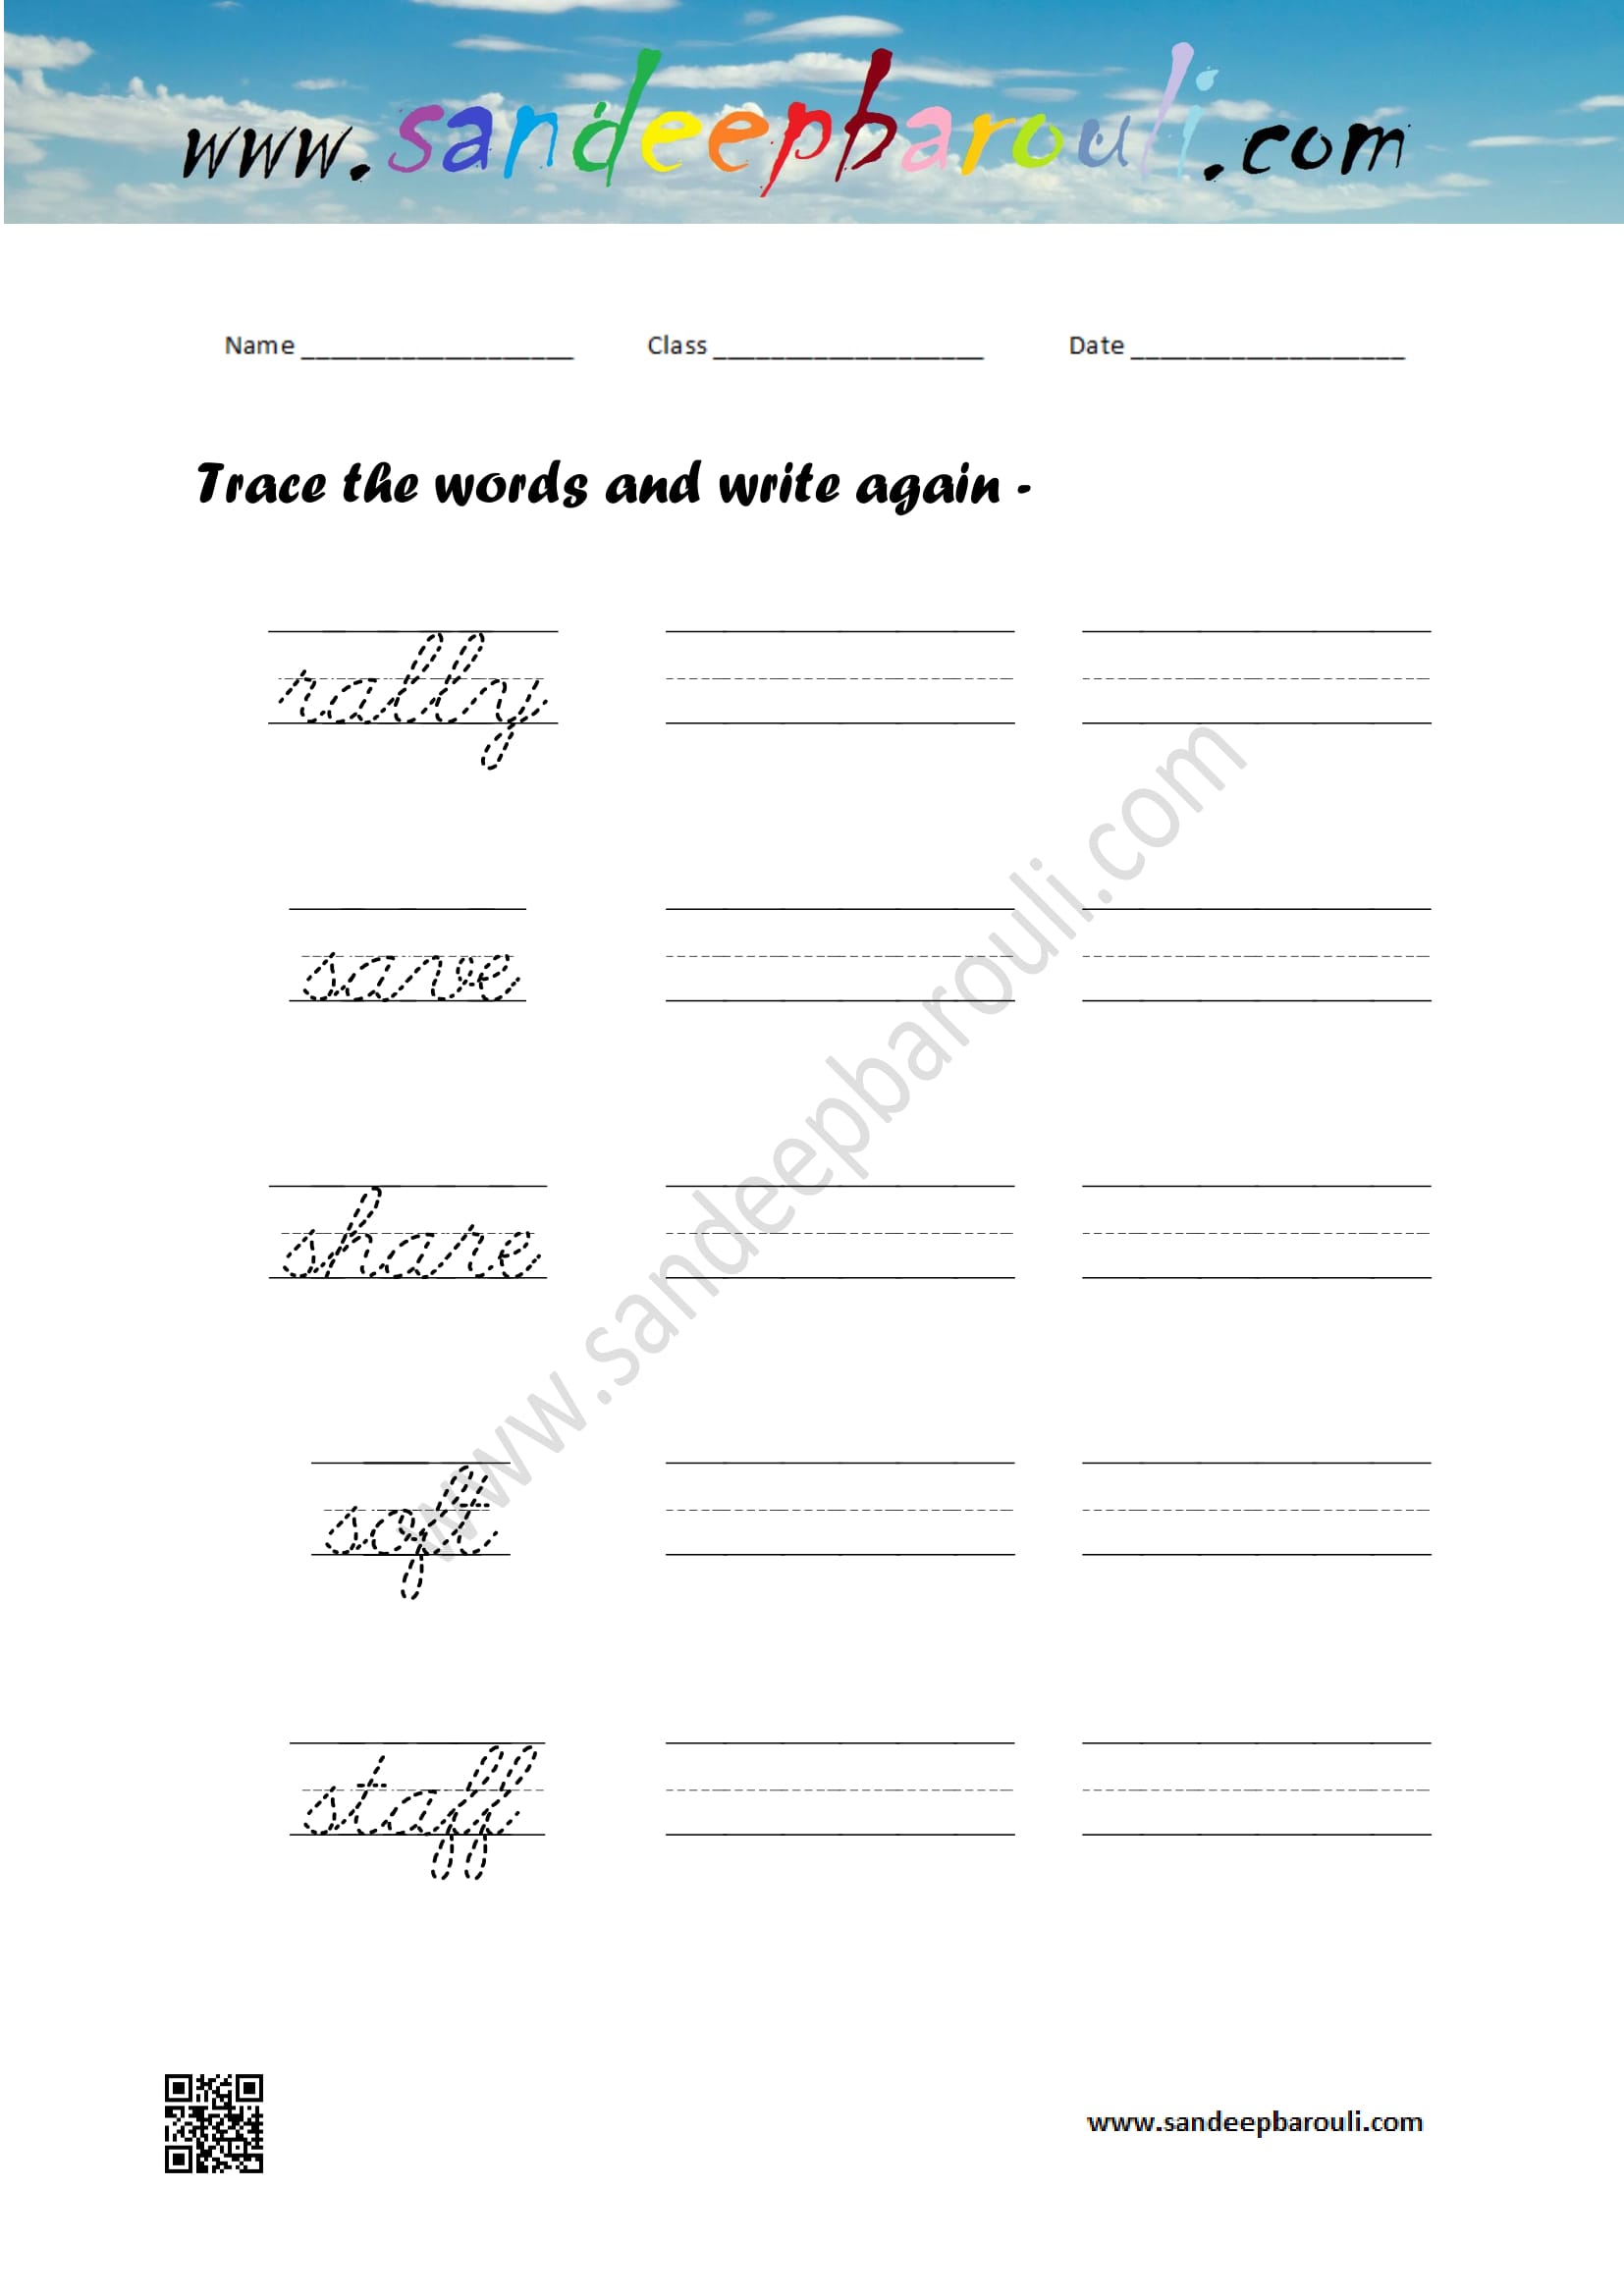 Cursive writing worksheet – trace the words and write again (84)